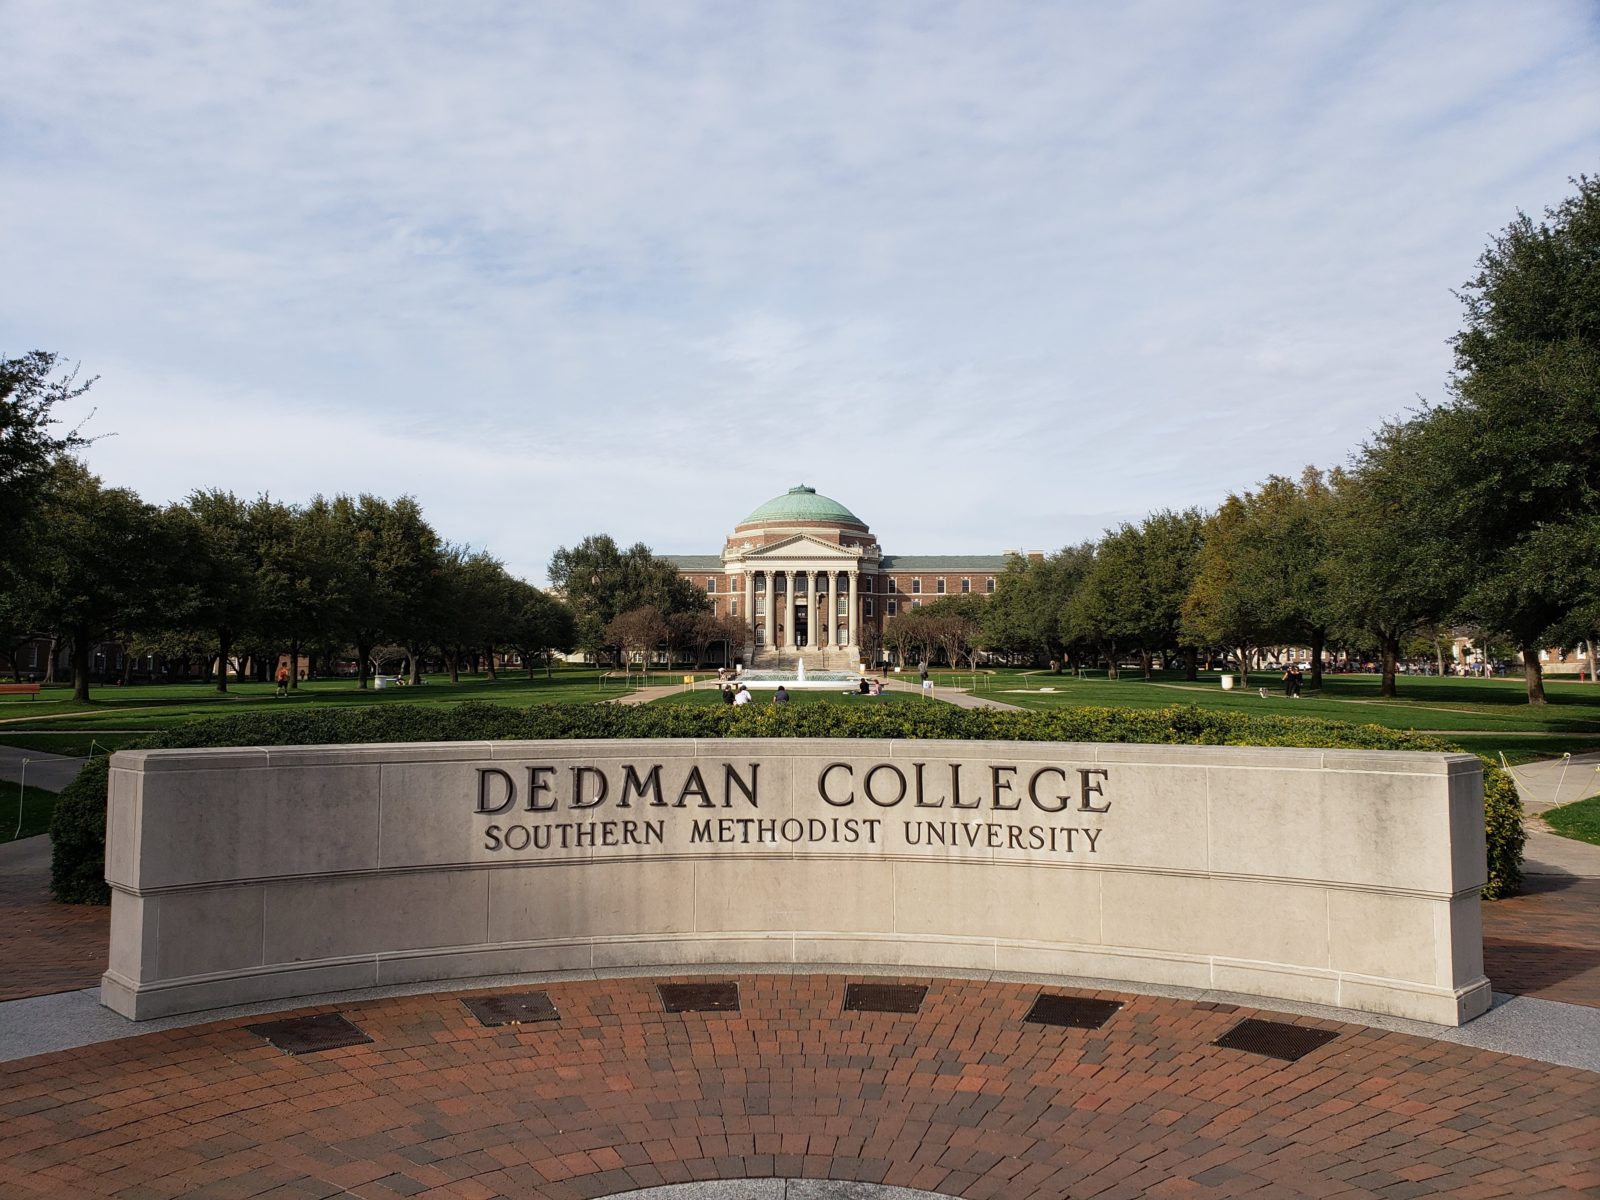 Dallas Hall and the Dedman College monument at Southern Methodist University (SMU) in Dallas, TX